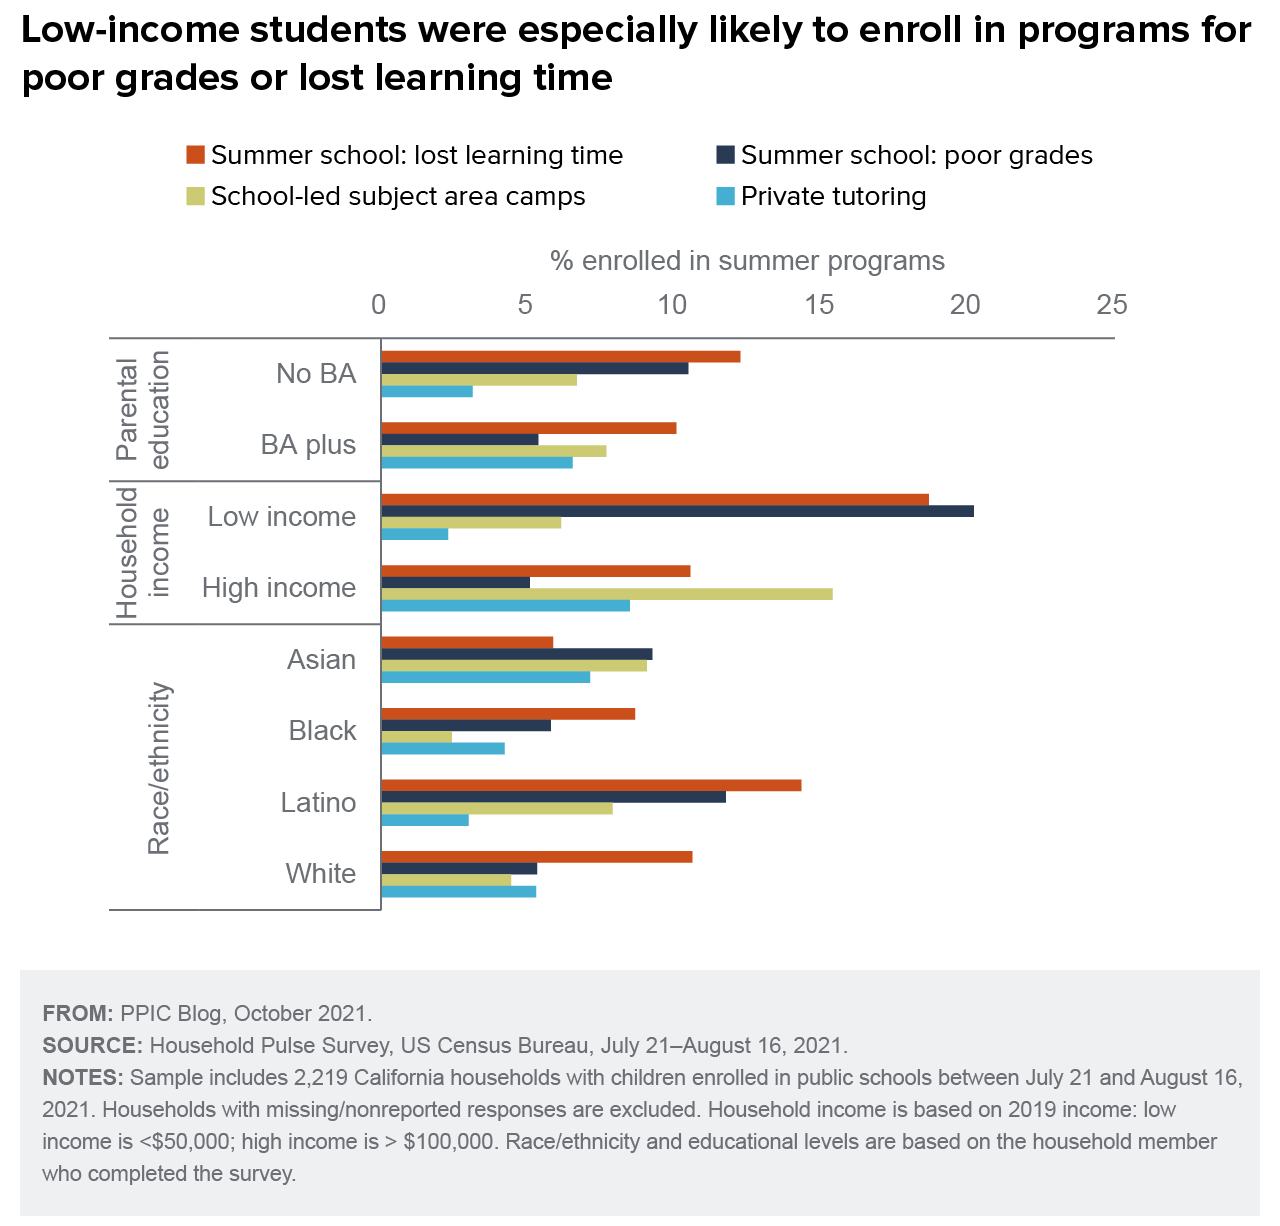 figure - Low-income students were especially likely to enroll in programs for poor grades or lost learning time